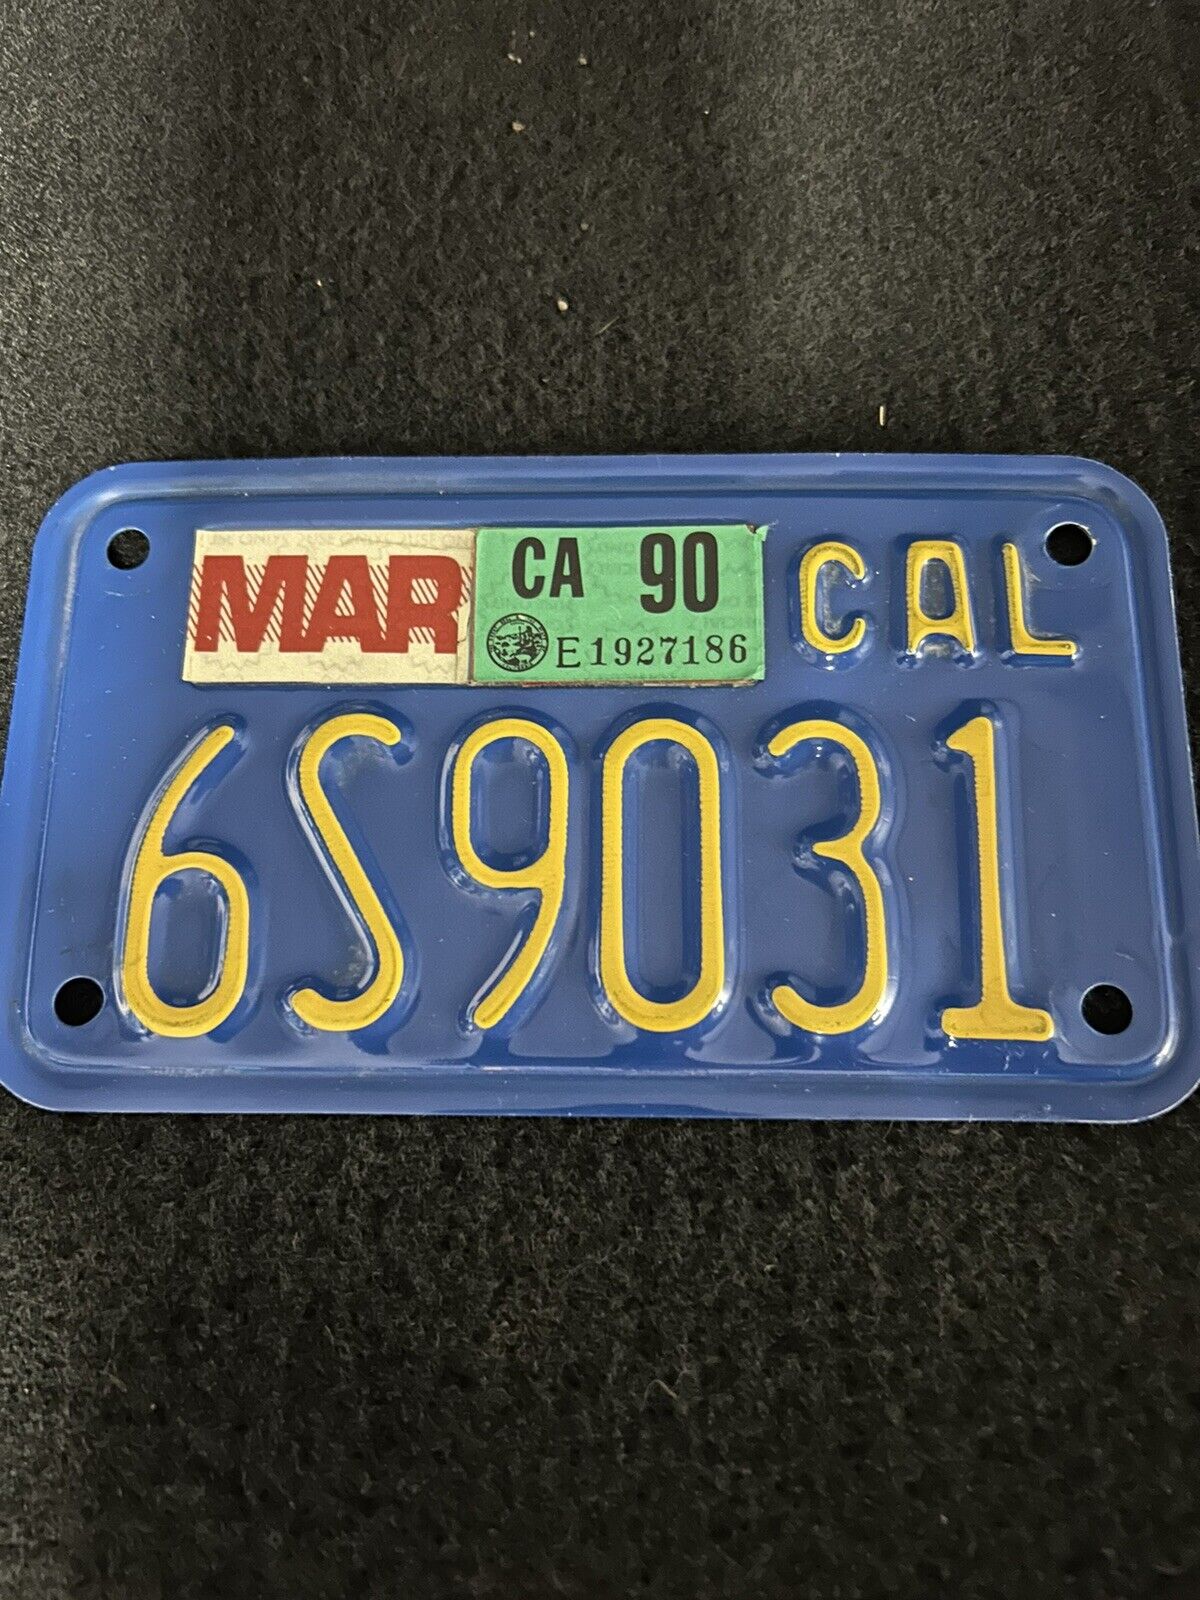 Vintage 1970s California Blue Yellow Motorcycle License Plate 1990 Reg